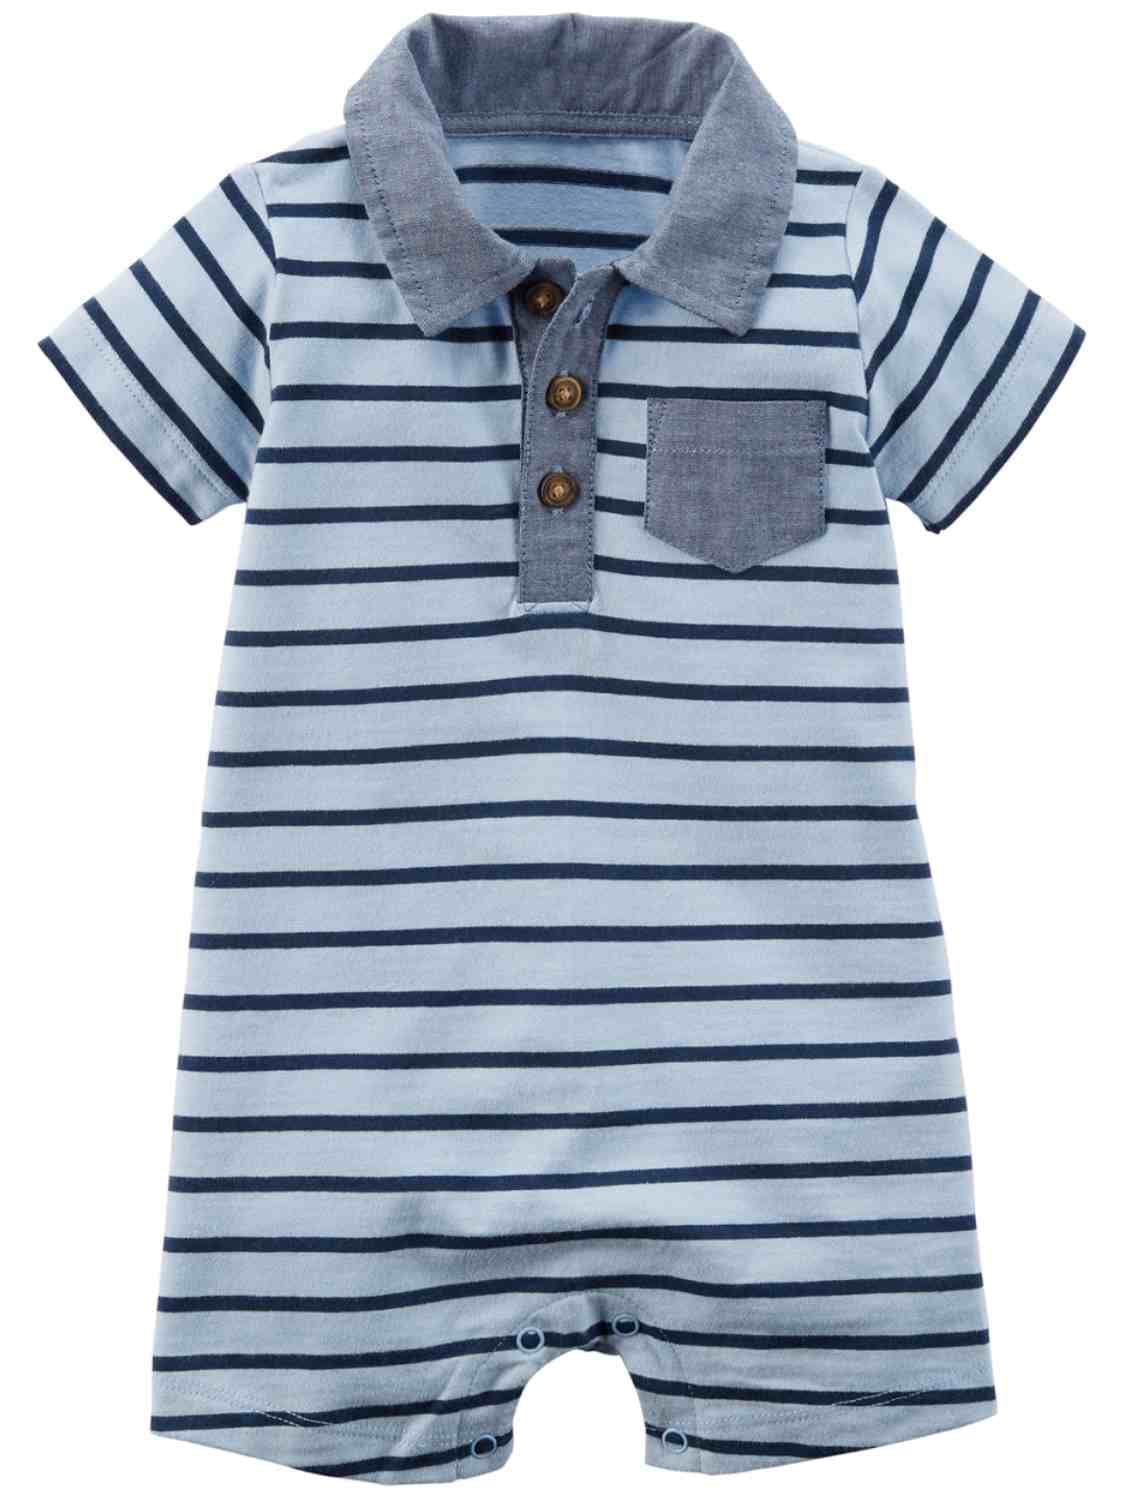 Carter's Carters Infant Boys Blue Striped Collared Polo Shirt Romper Baby Bodysuit 18m